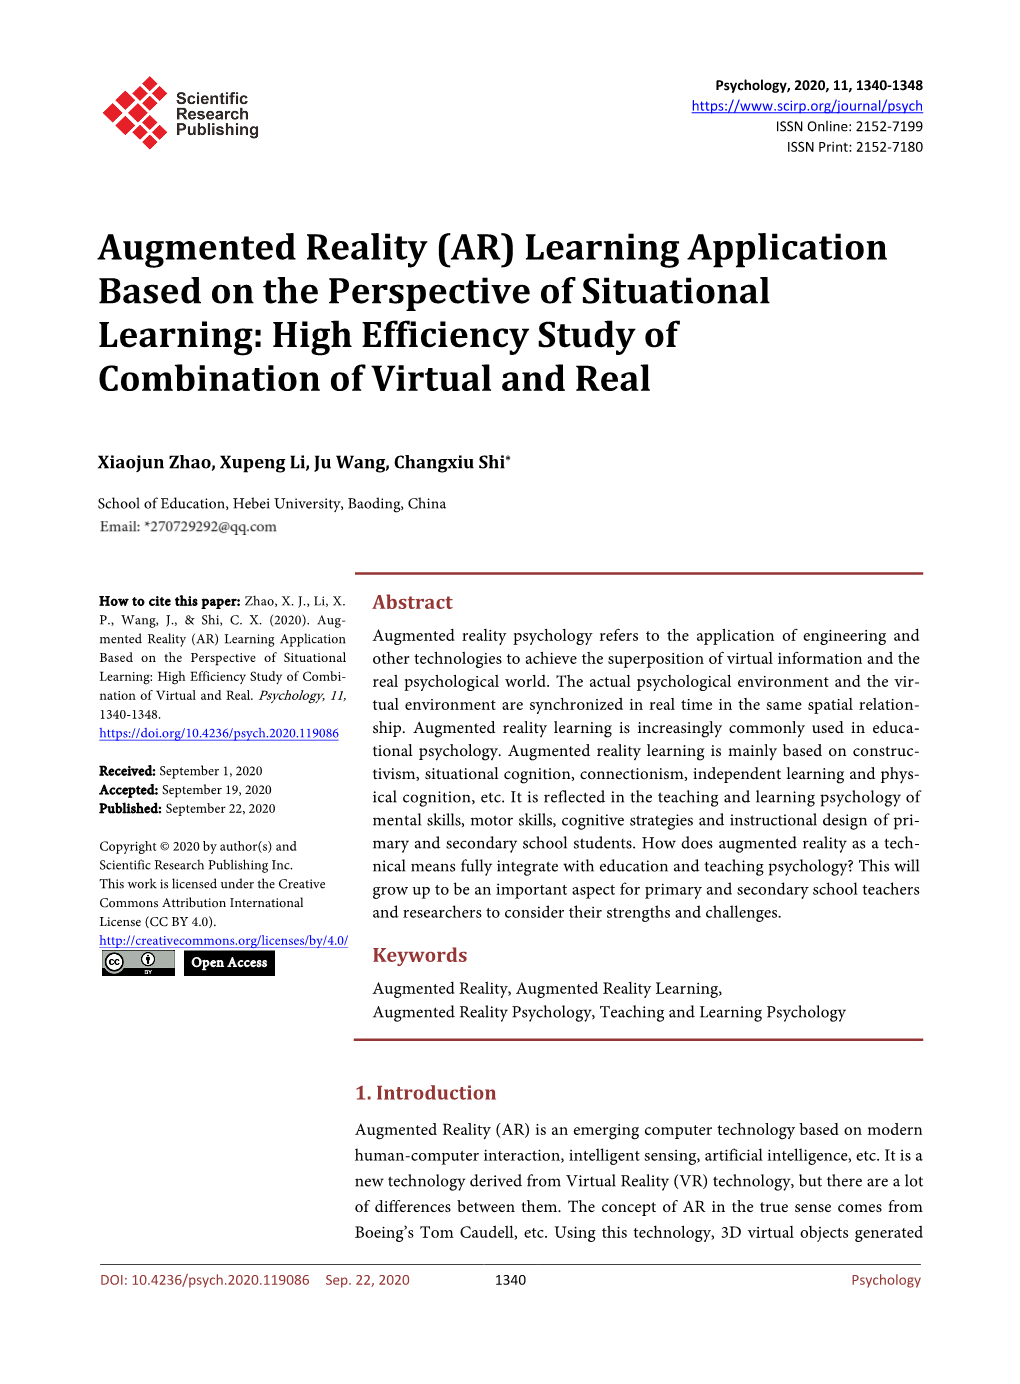 Augmented Reality (AR) Learning Application Based on the Perspective of Situational Learning: High Efficiency Study of Combination of Virtual and Real